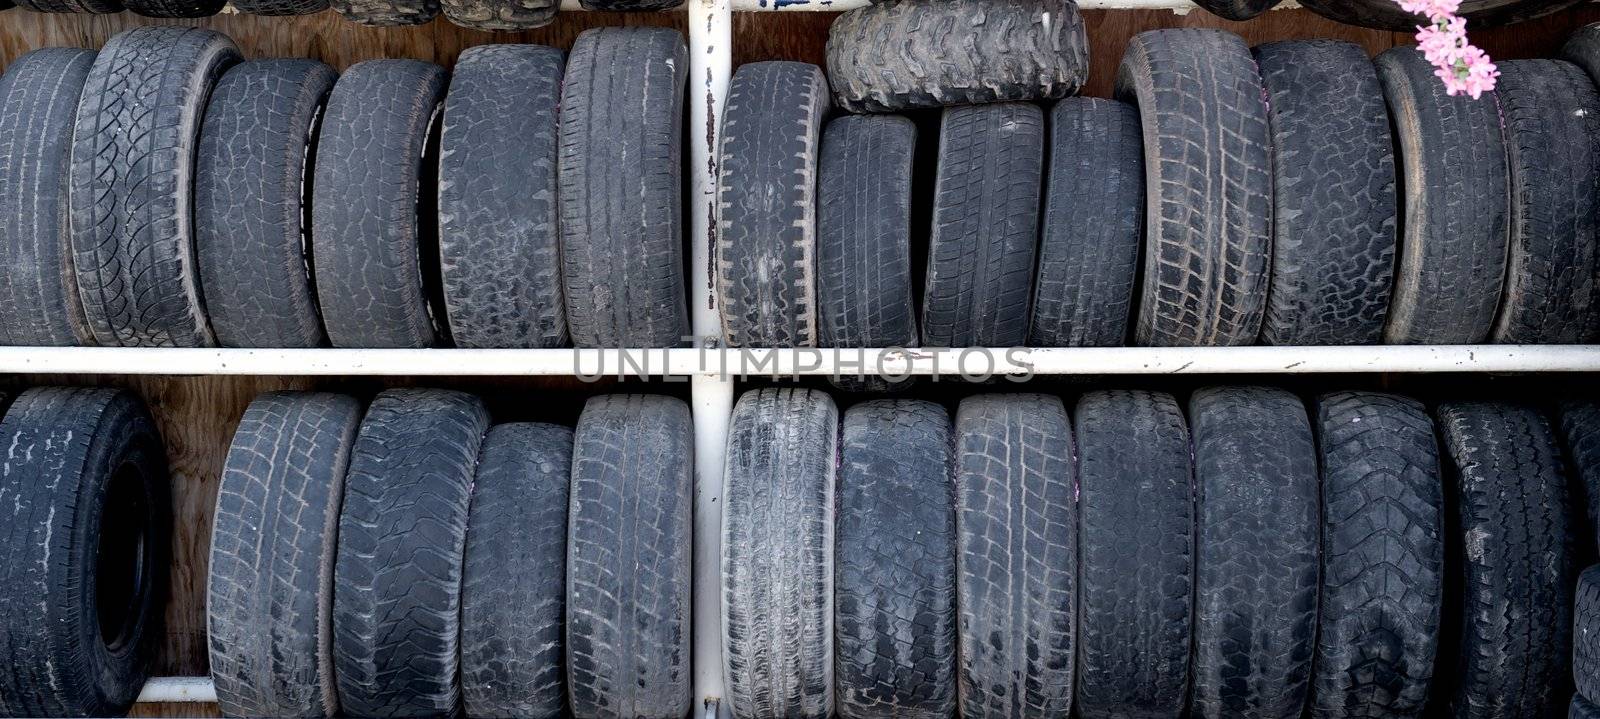 A double rack of old and worn rubber auto tires